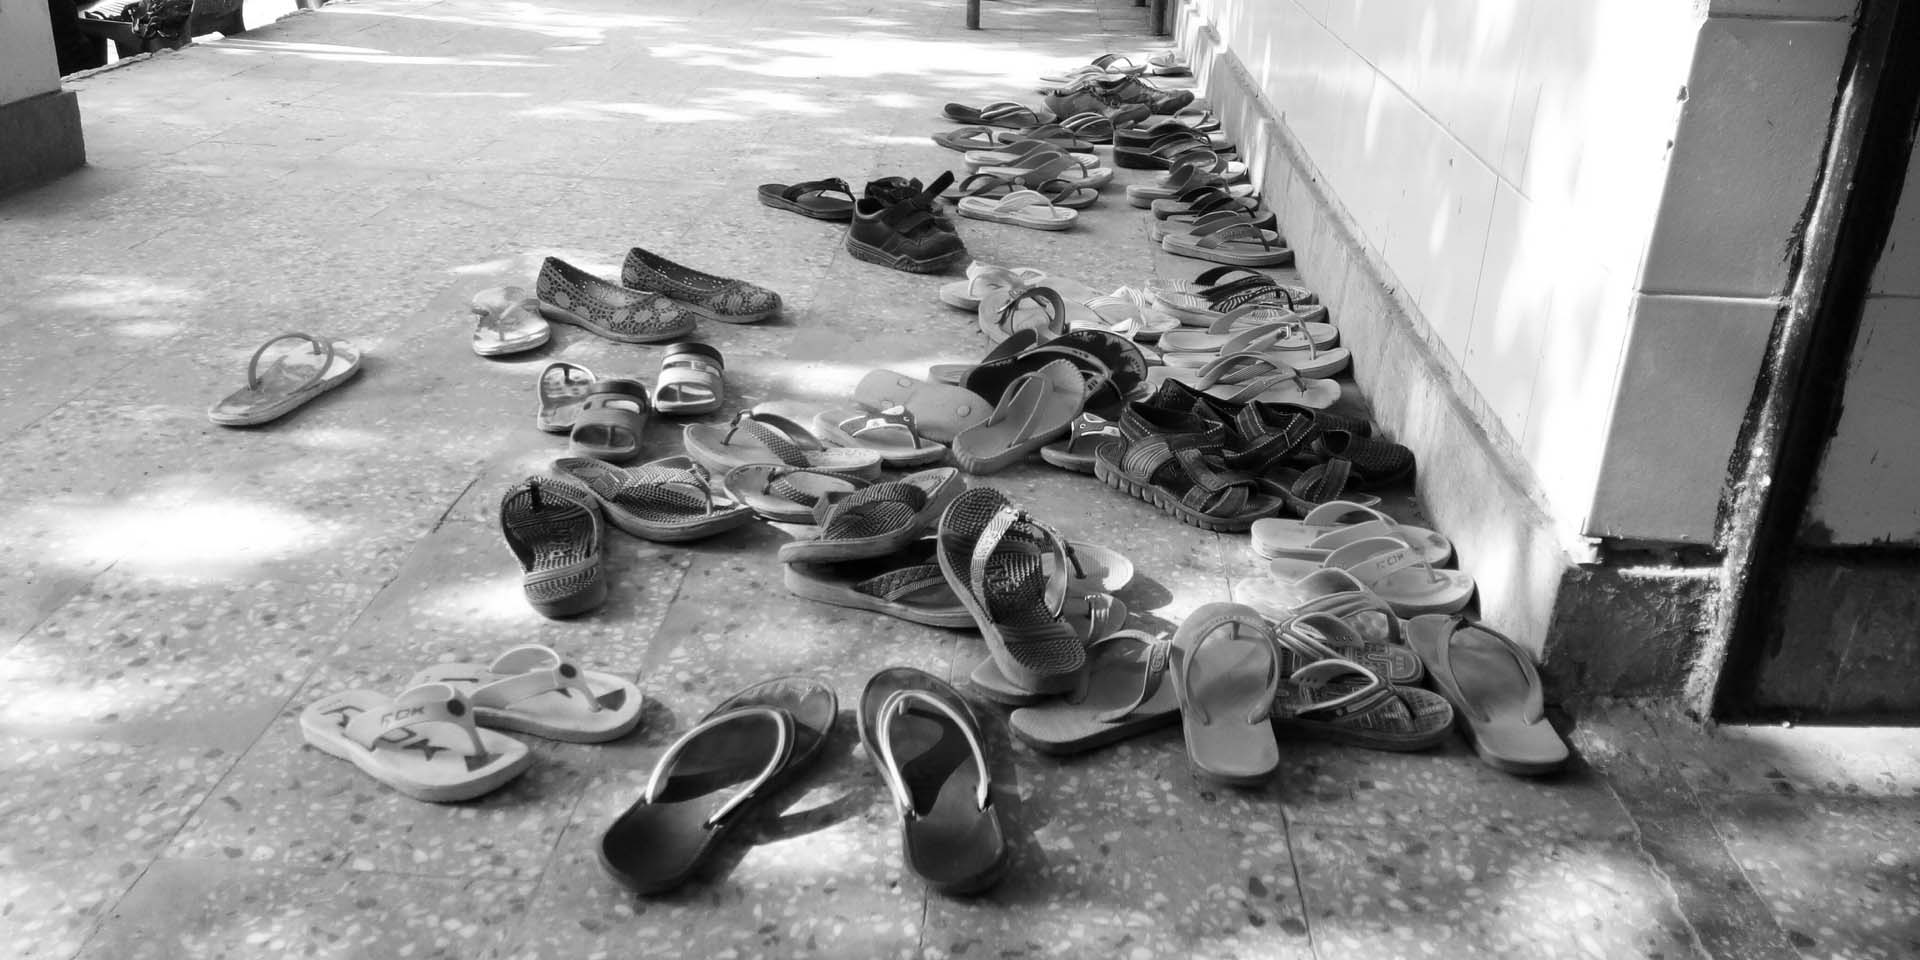 A pile of chappals outside a classroom